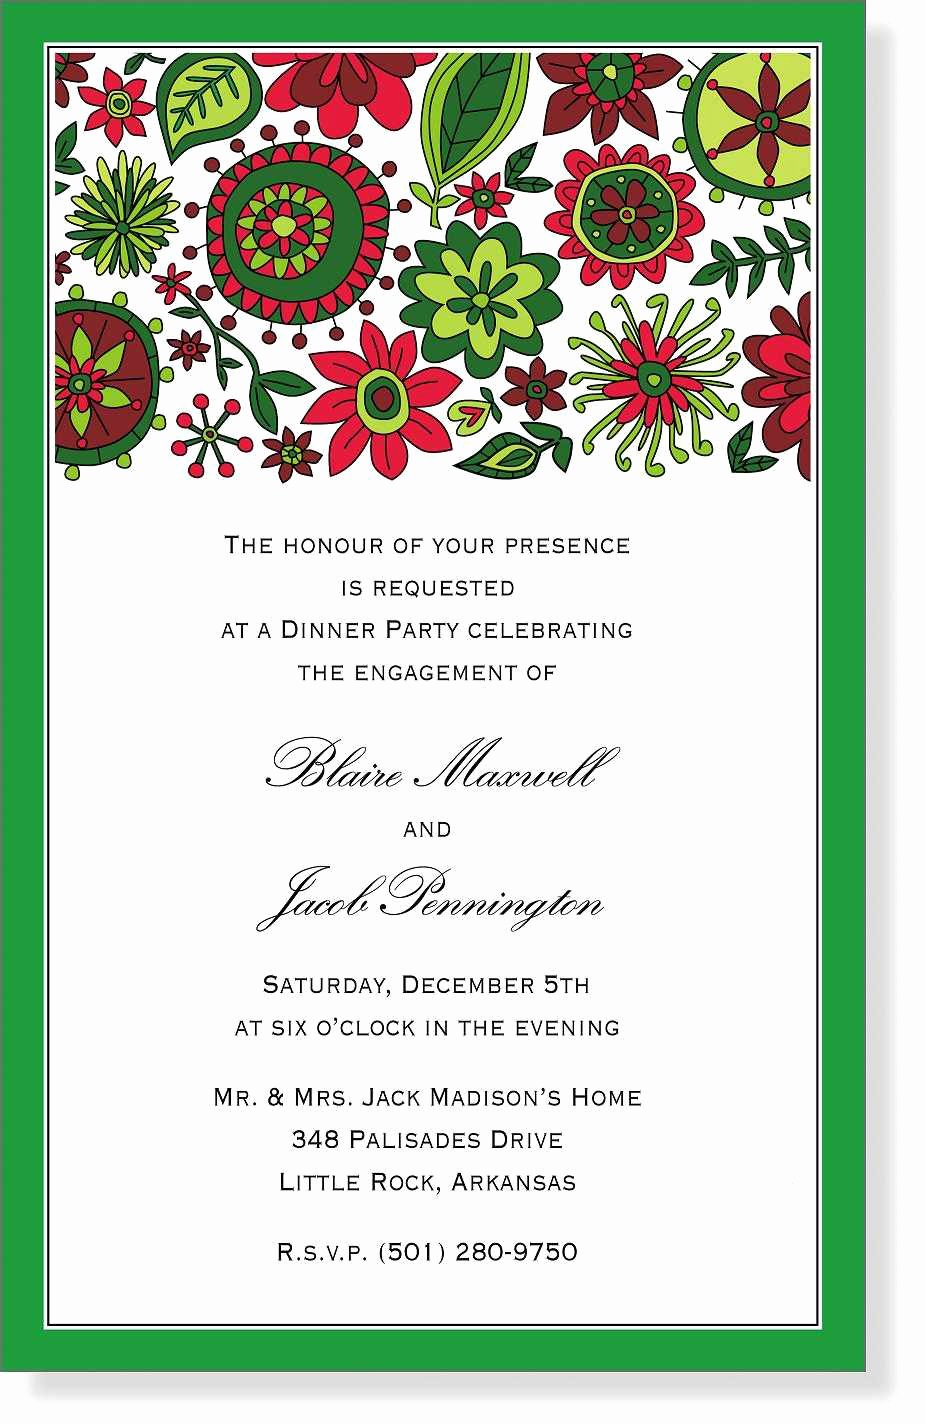 Sample Invitation Letter for Christmas Party